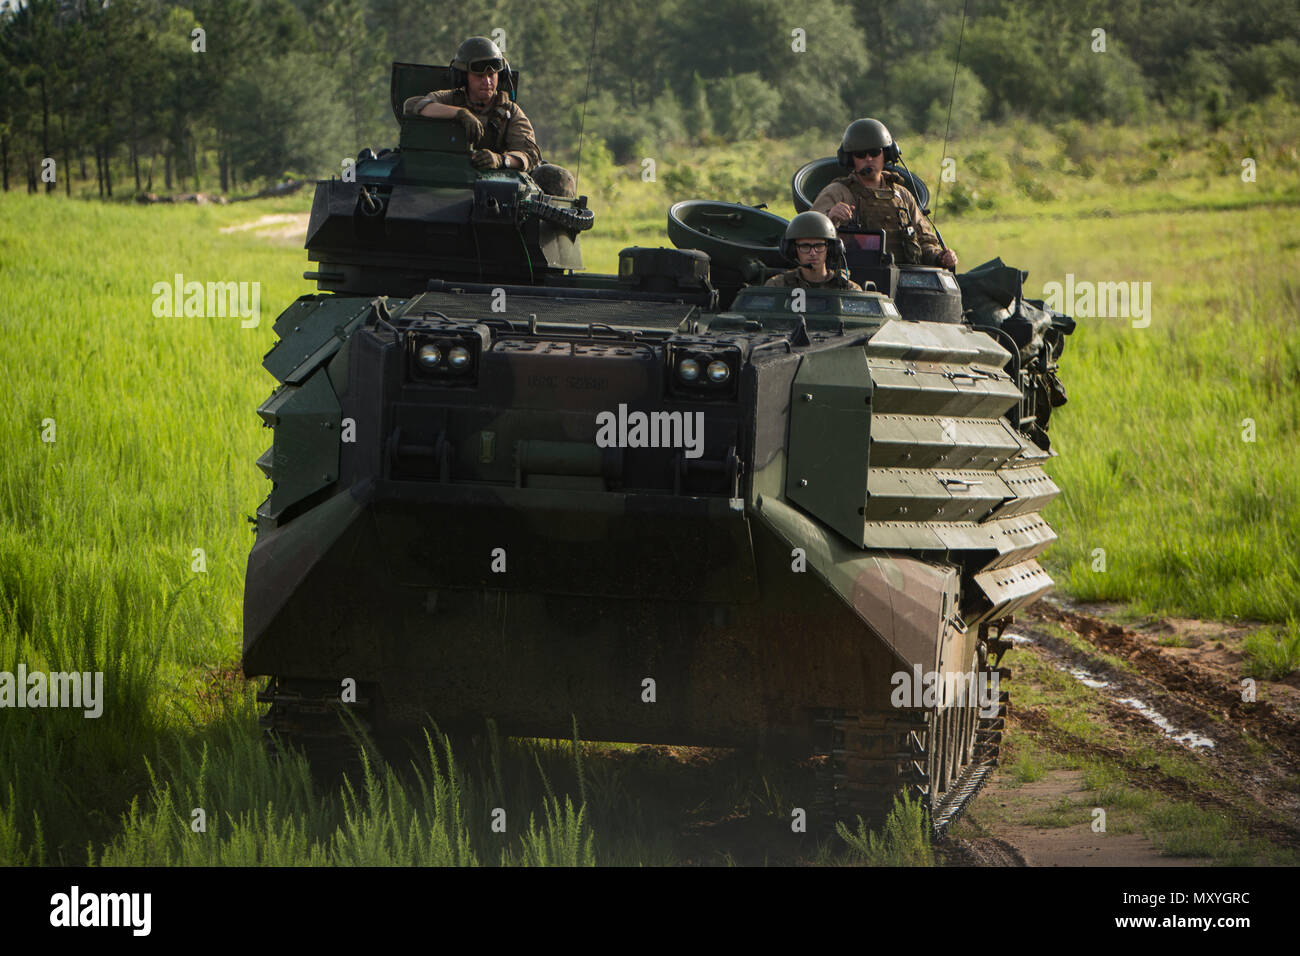 U.S. Marines with Mobility and Counter-Mobility Platoon, 2nd Assault Amphibian Battalion (AABn), 2nd Marine Division, drive an AAV-P7/A1 assault amphibious vehicle to a firing range during a deployment for training (DFT) exercise at Fort Stewart, Ga., May 29, 2018. The unit executed numerous ranges as part of the DFT to enhance their combat readiness and efficiency with the AAV-P7/A1. The DFT assists in maintaining proficiency in landing the surface assault element during amphibious operations to inland objectives with conduction mechanized operations and related combat support in operations a Stock Photo